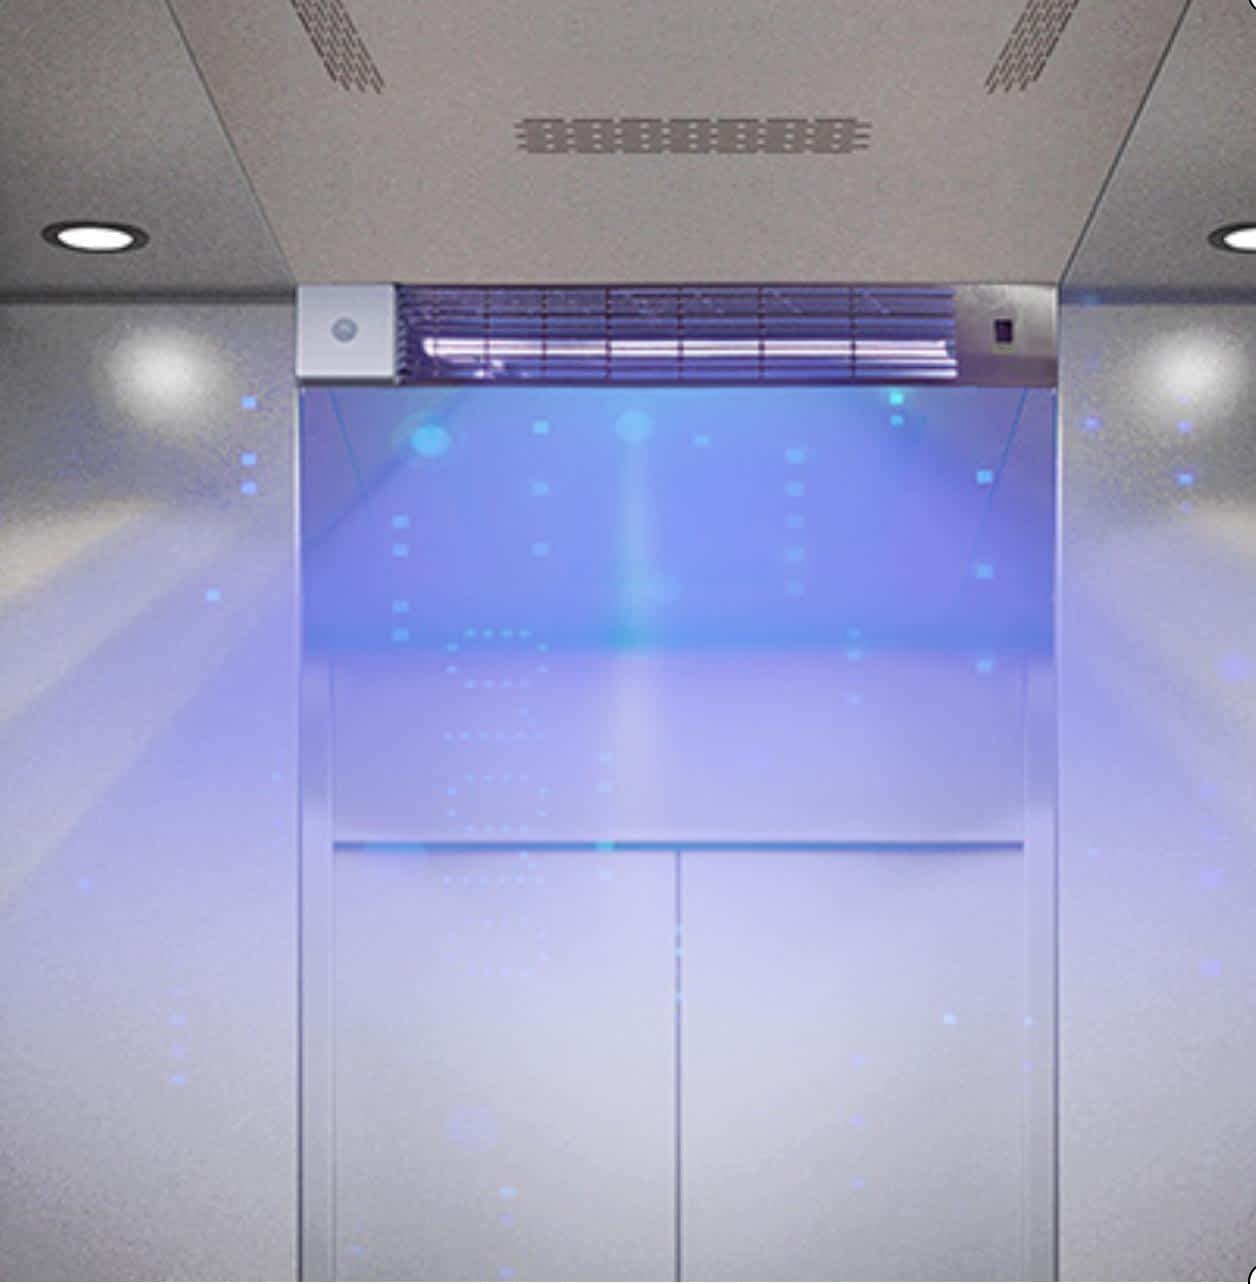 UV Disinfection Recommendations For Elevators In The Covid-19 Outbreak